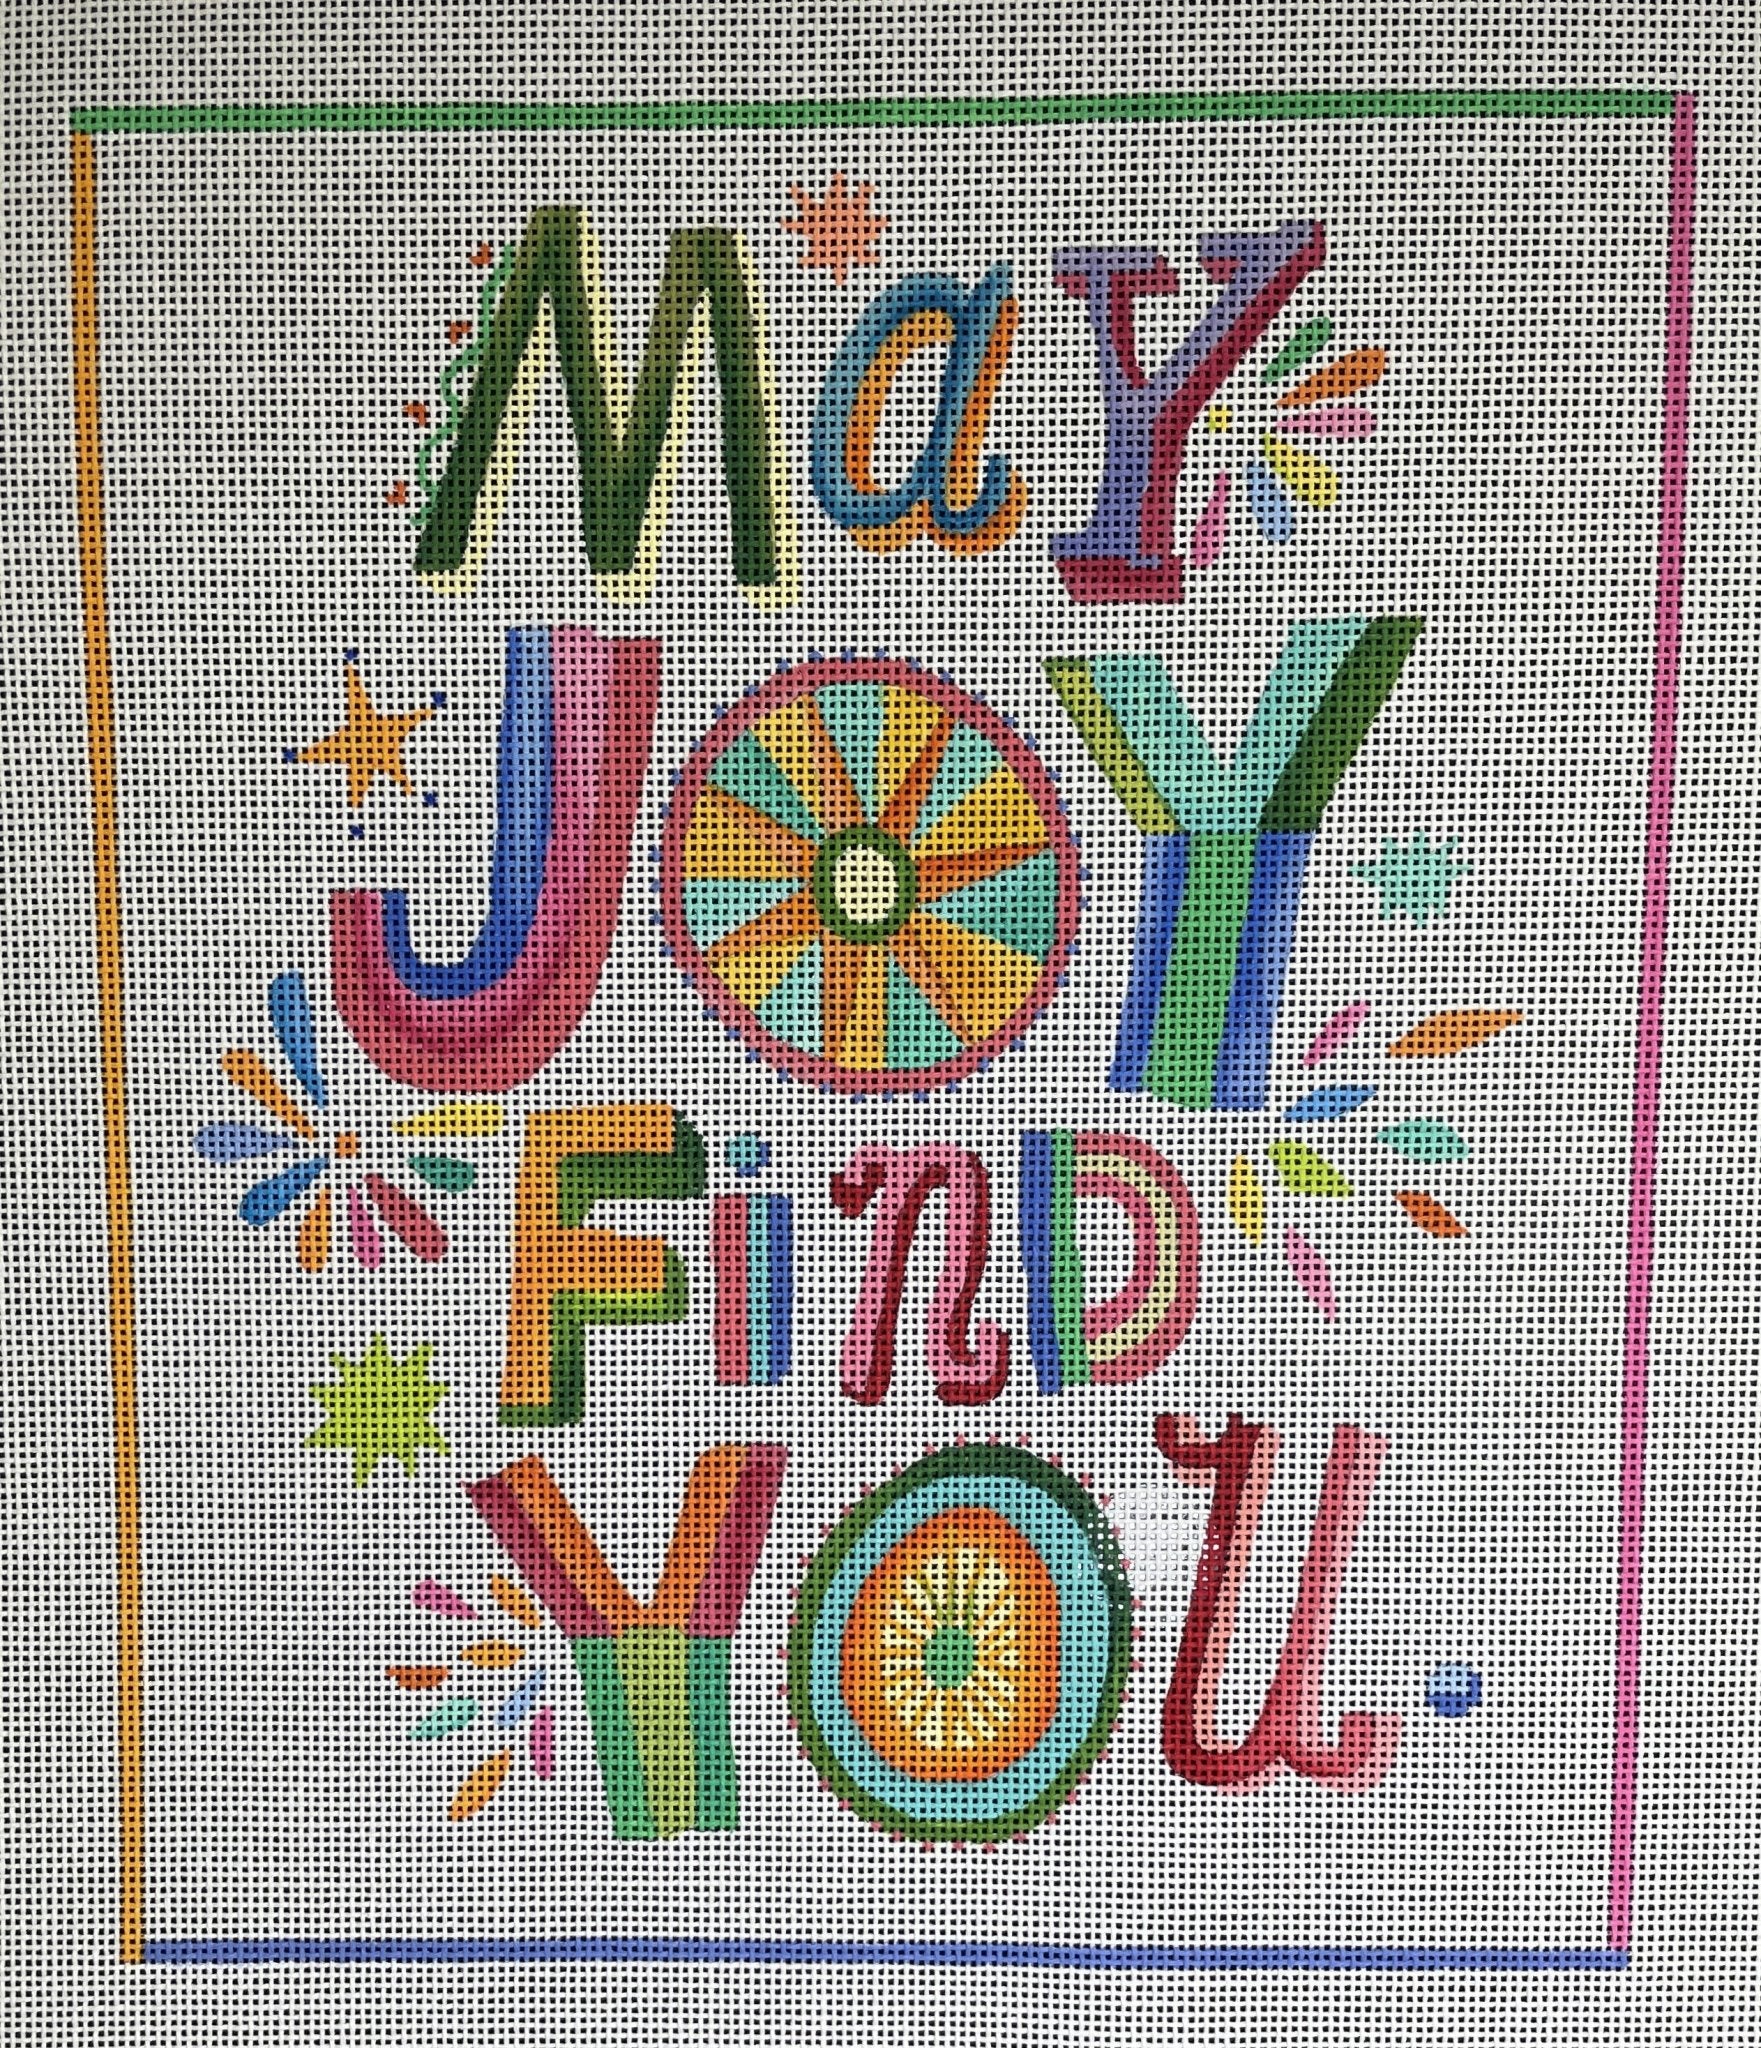 May Joy Find You - The Flying Needles